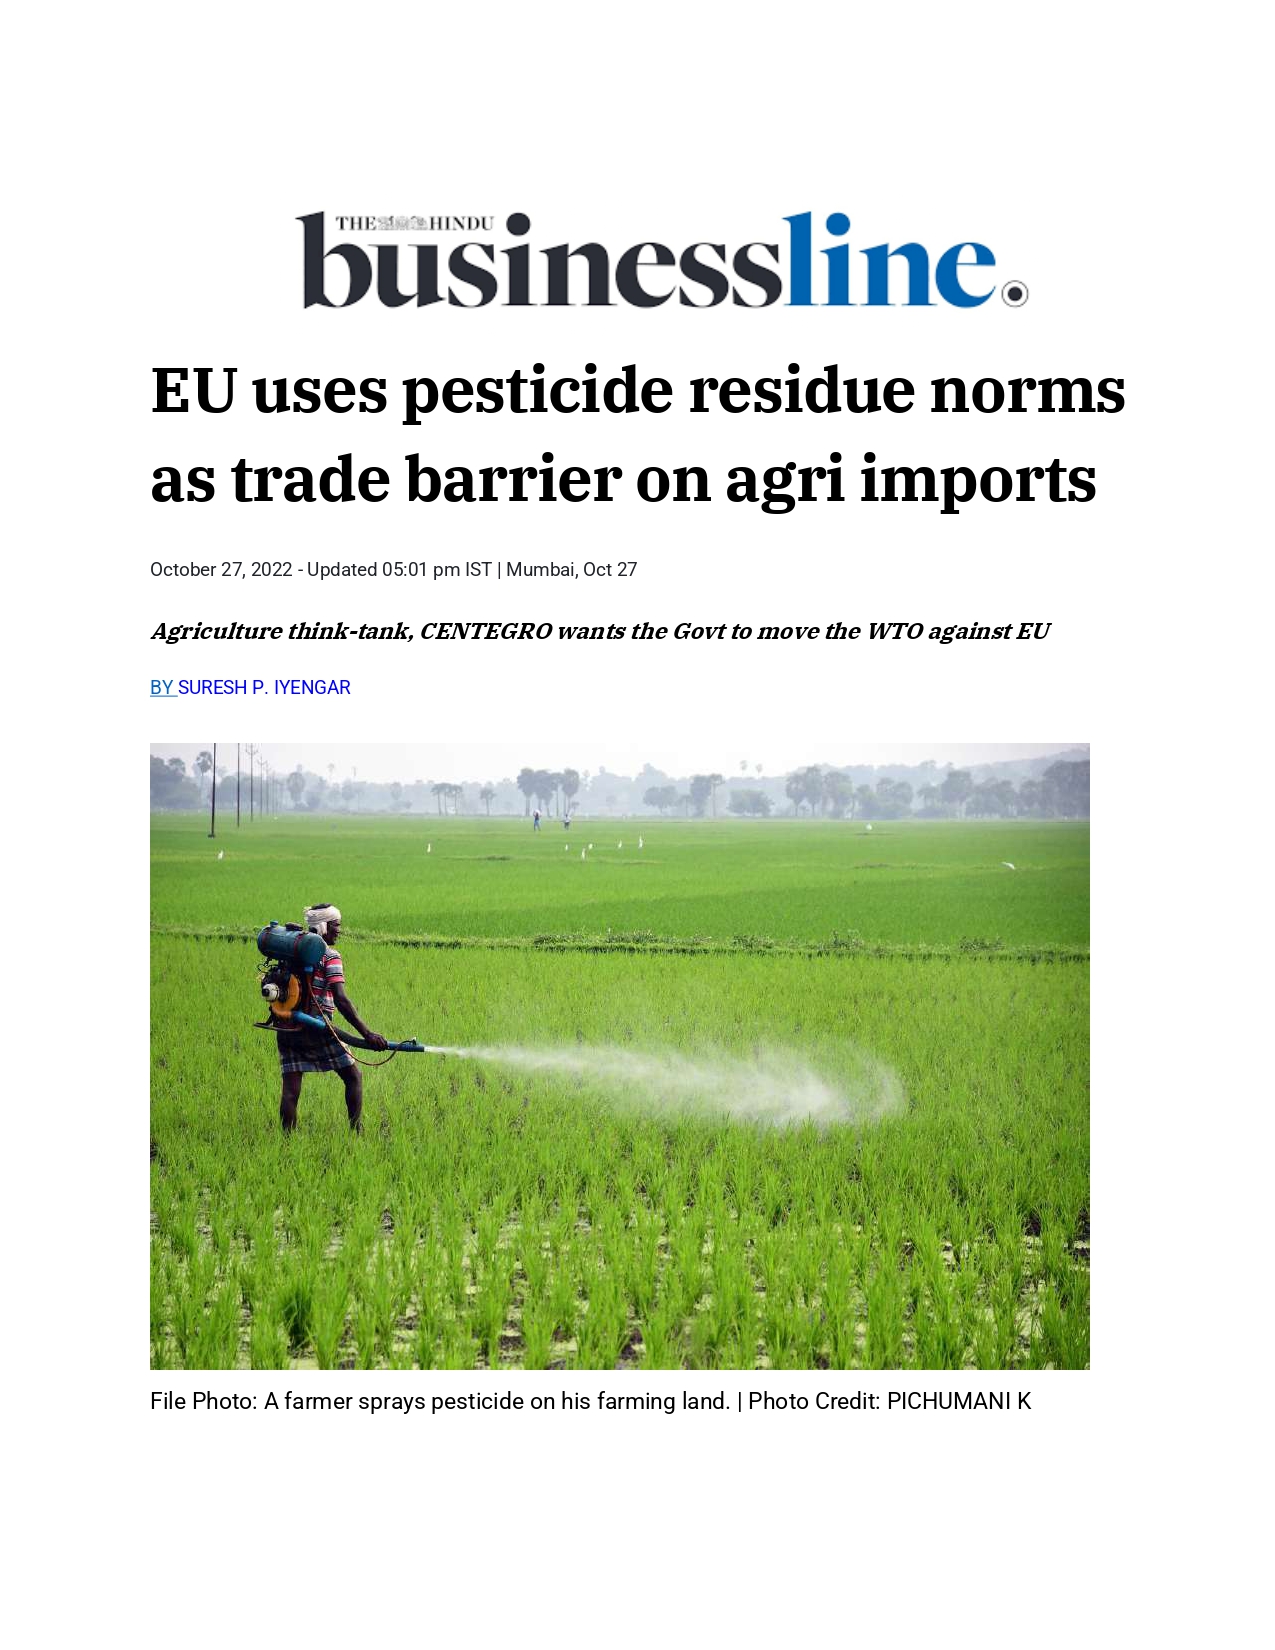 Business Line dated 27th October - EU uses pesticide residue norms as trade barrier on agri imports -1